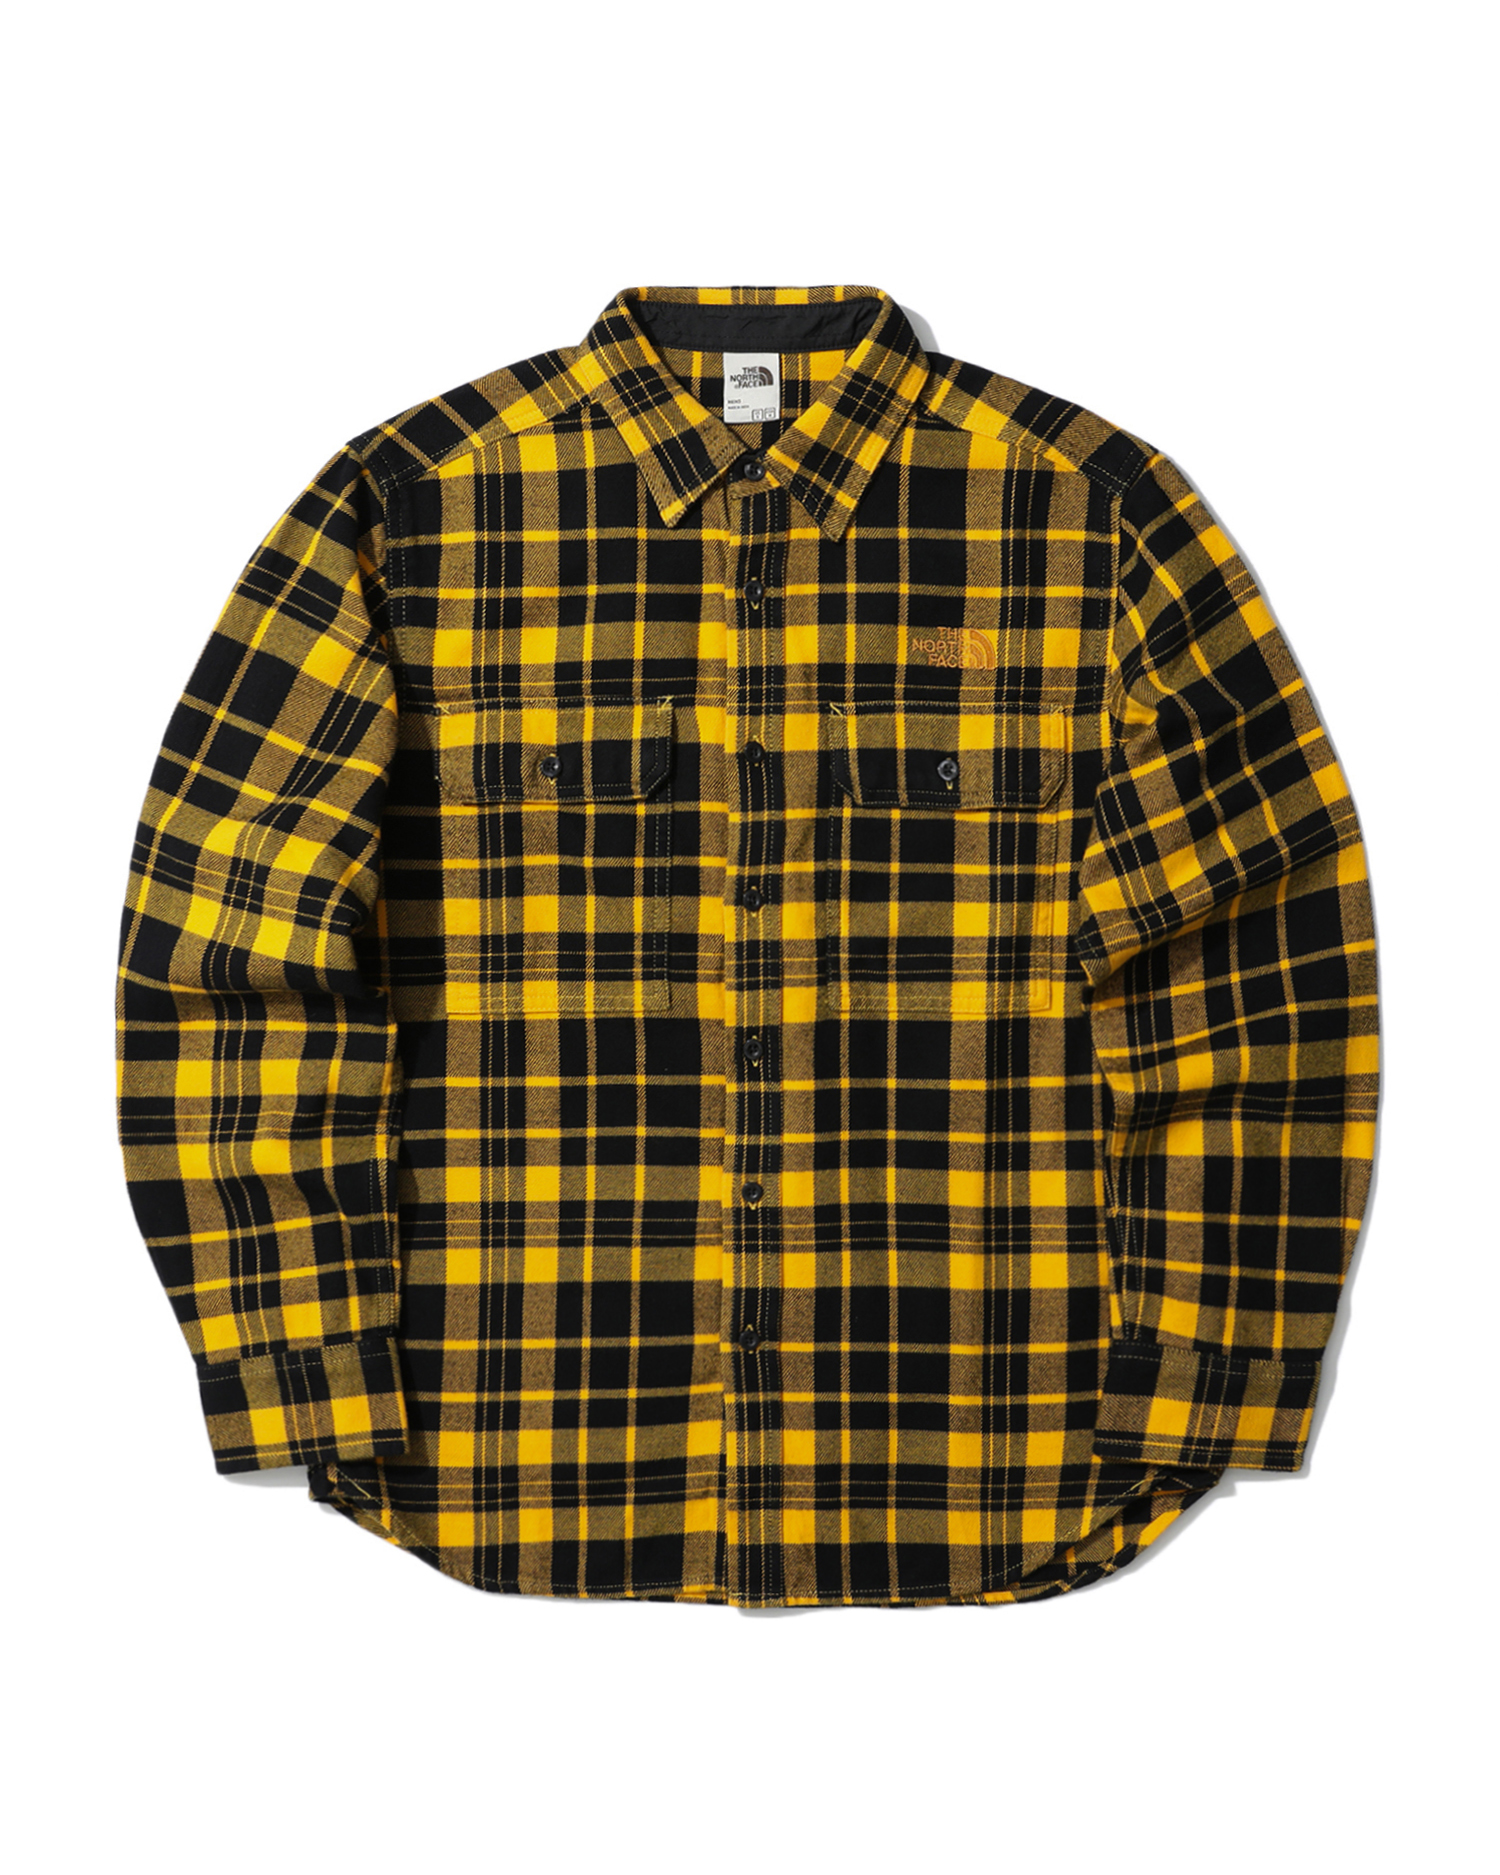 THE NORTH FACE Flannel shirt